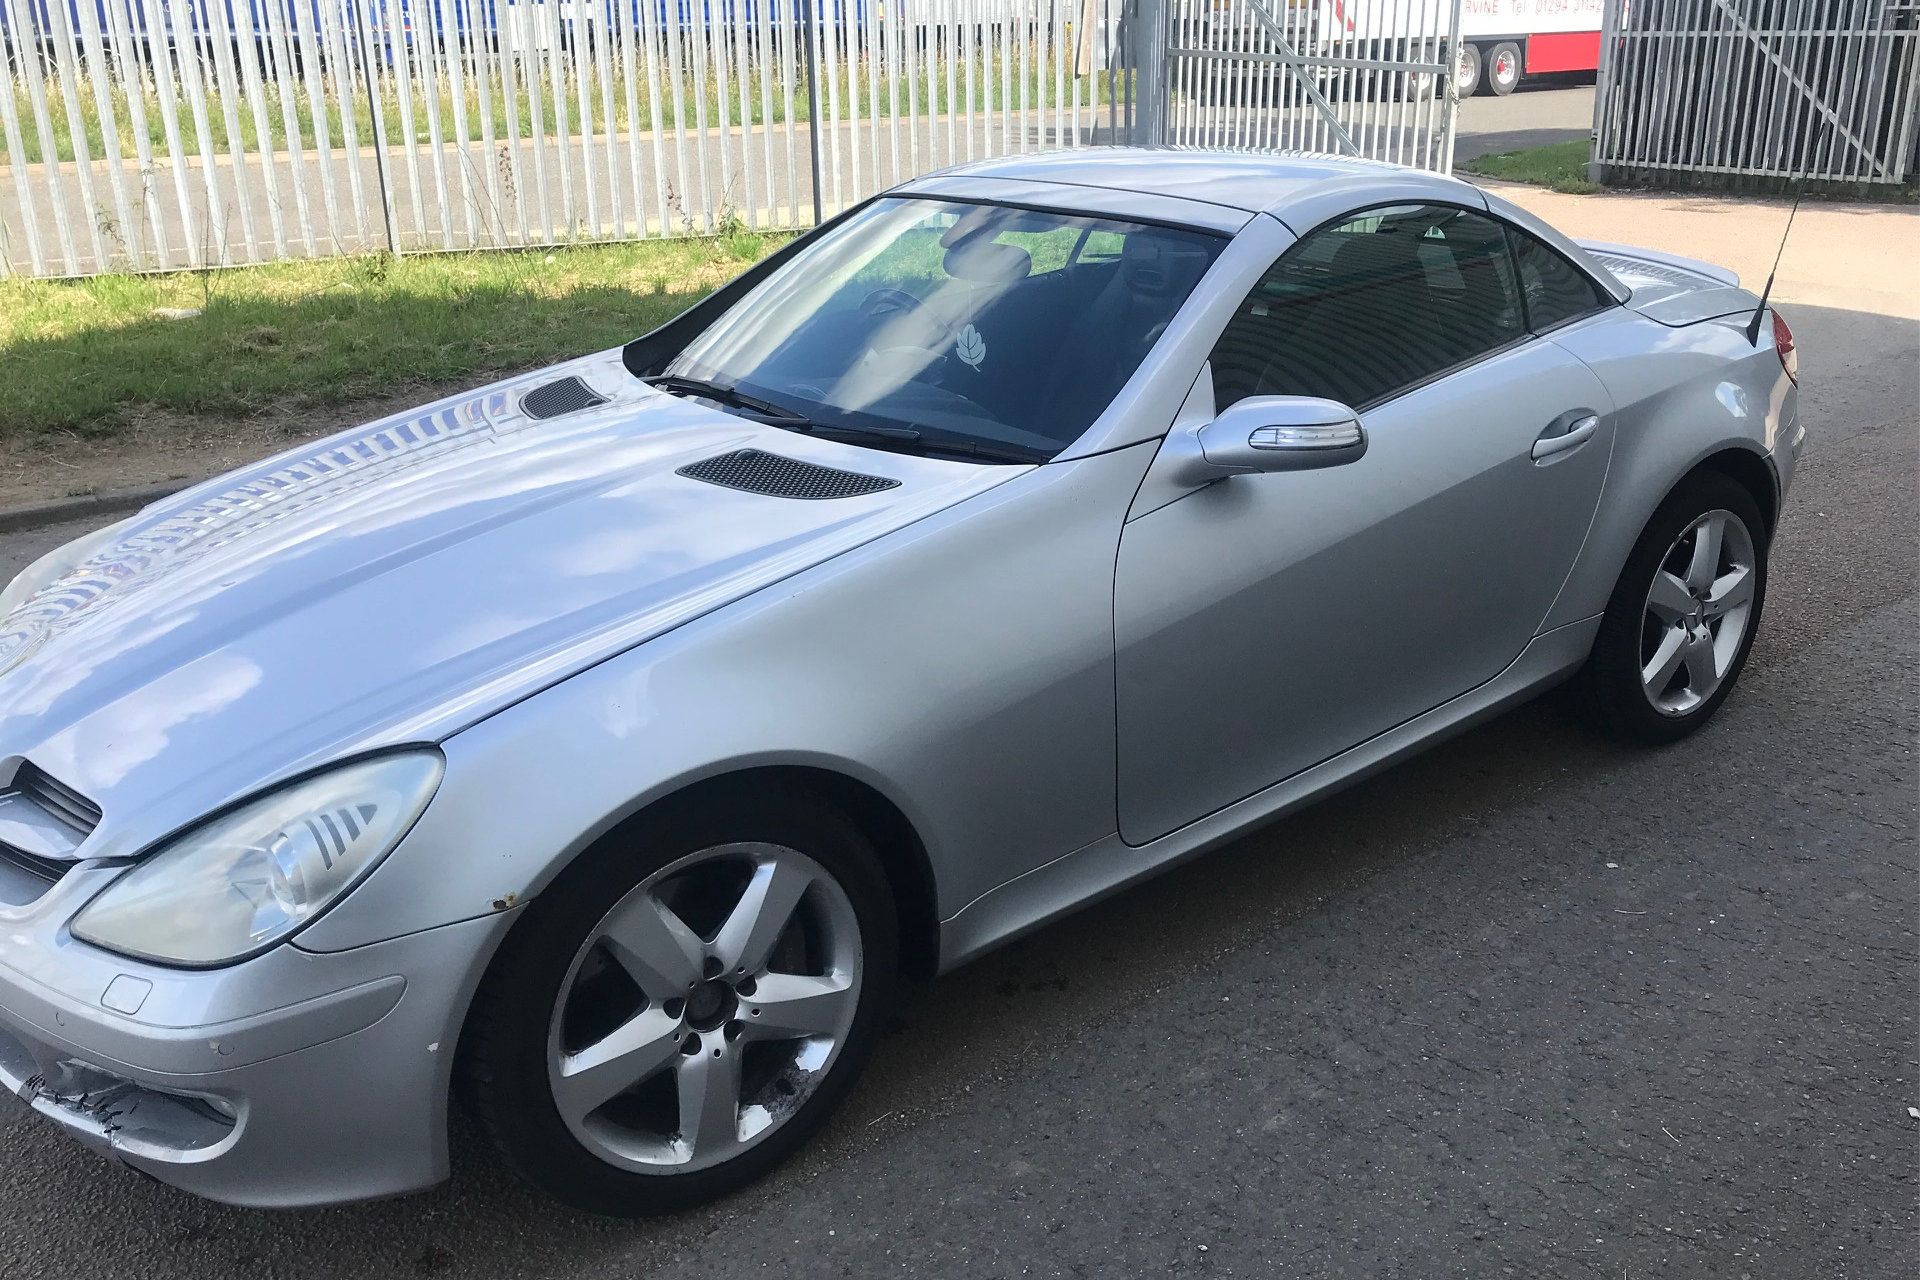 2005 Mercedes SLK 350 2 Dr Convertible - CL505 - NO VAT ON THE HAMMER - Location: Corby, N - Image 9 of 11